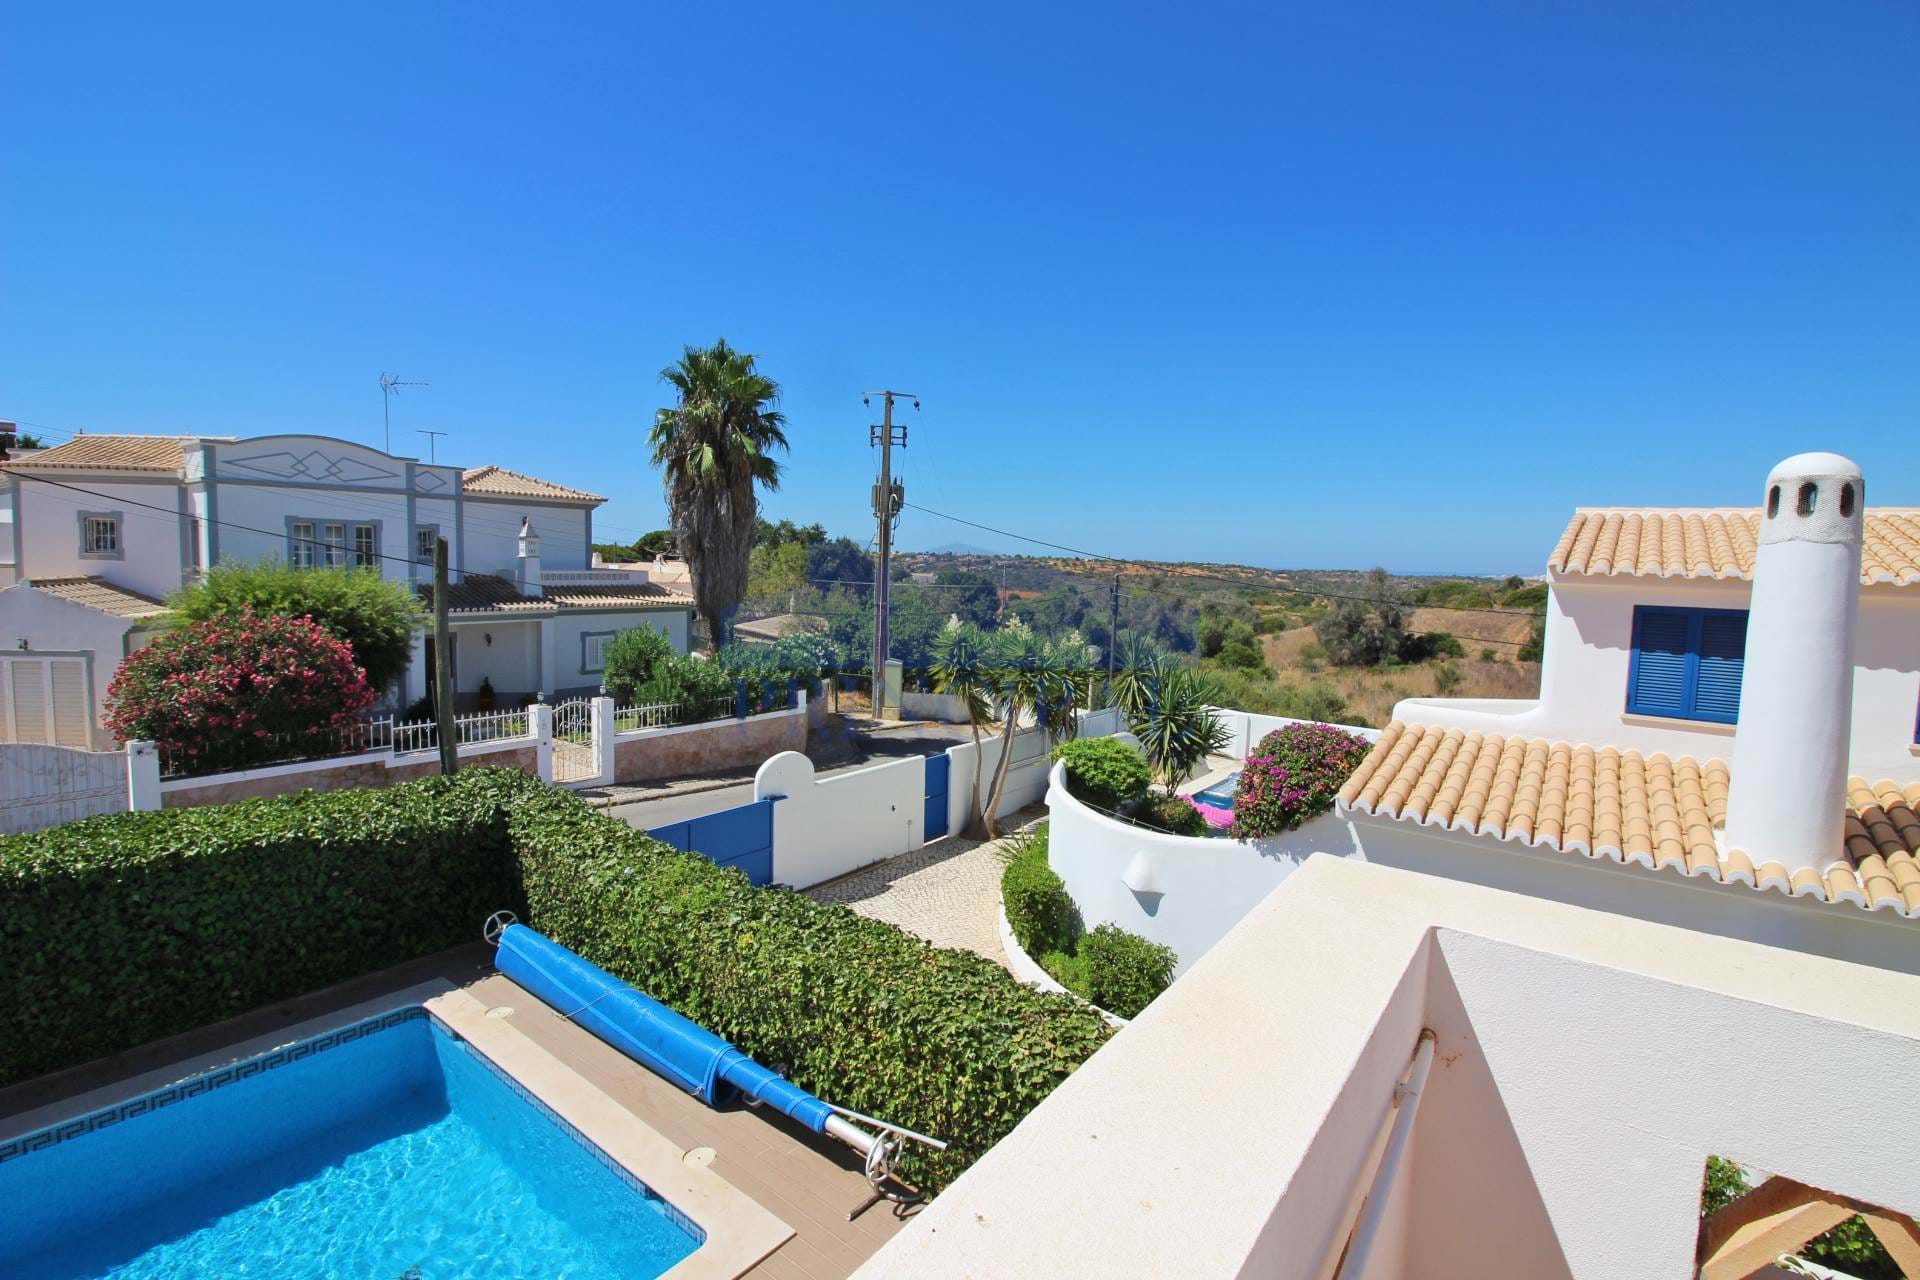 Detached Villa V4 w / pool in Privileged Residential Area